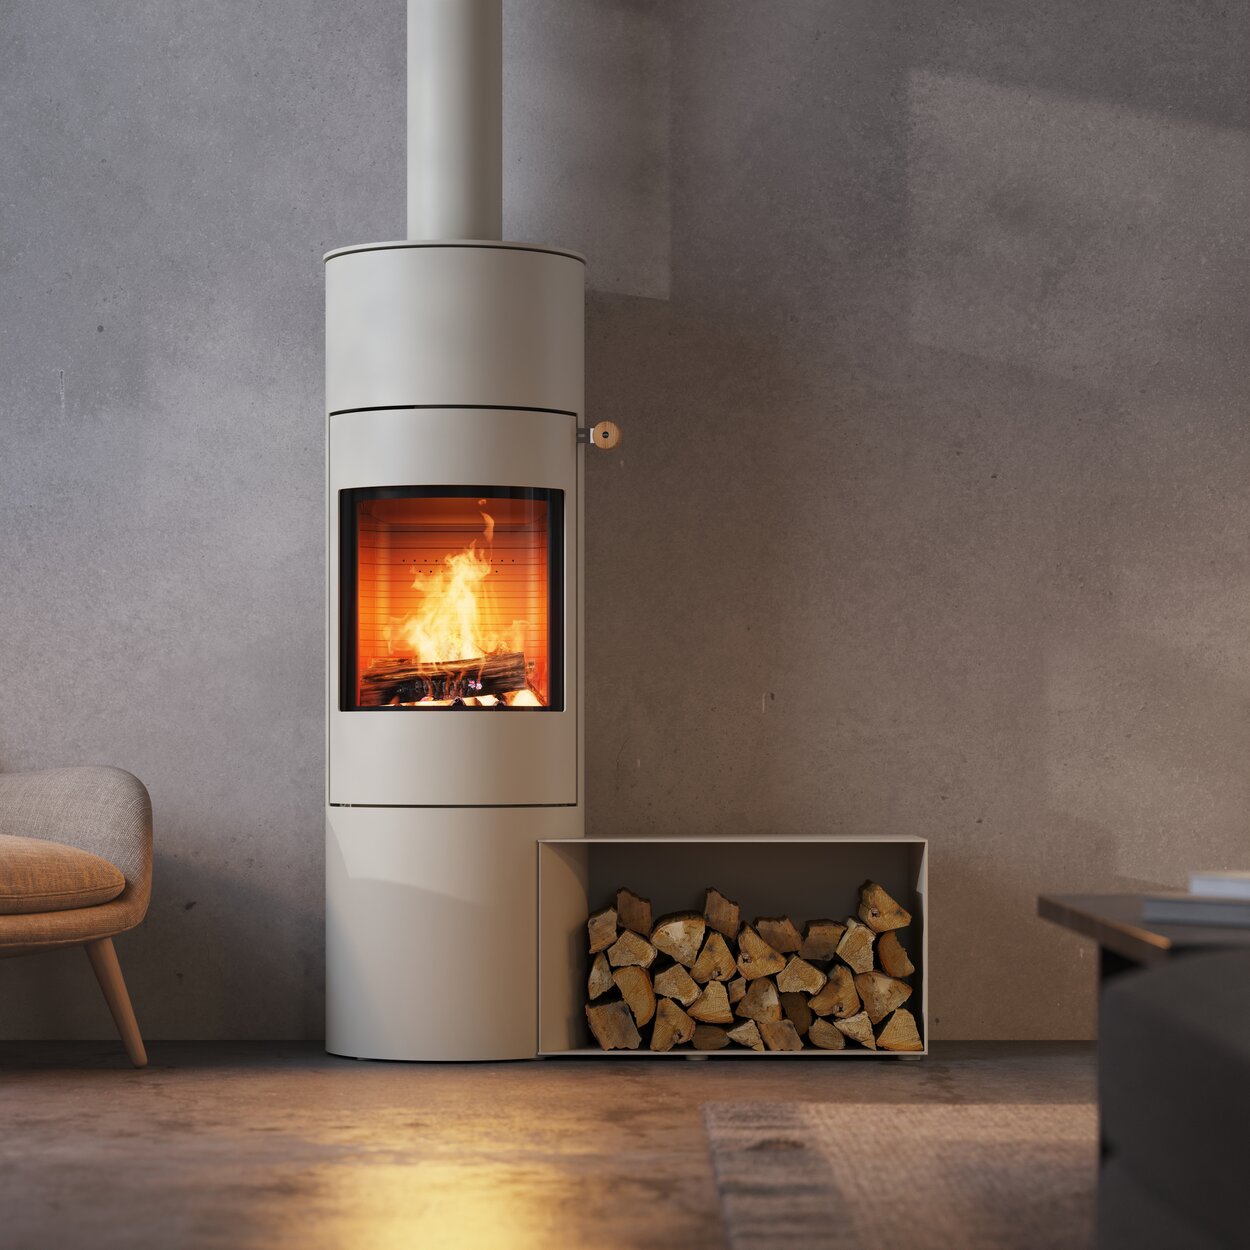 Wood stove VIVA 140 L in the colour sand with steel door and side bench